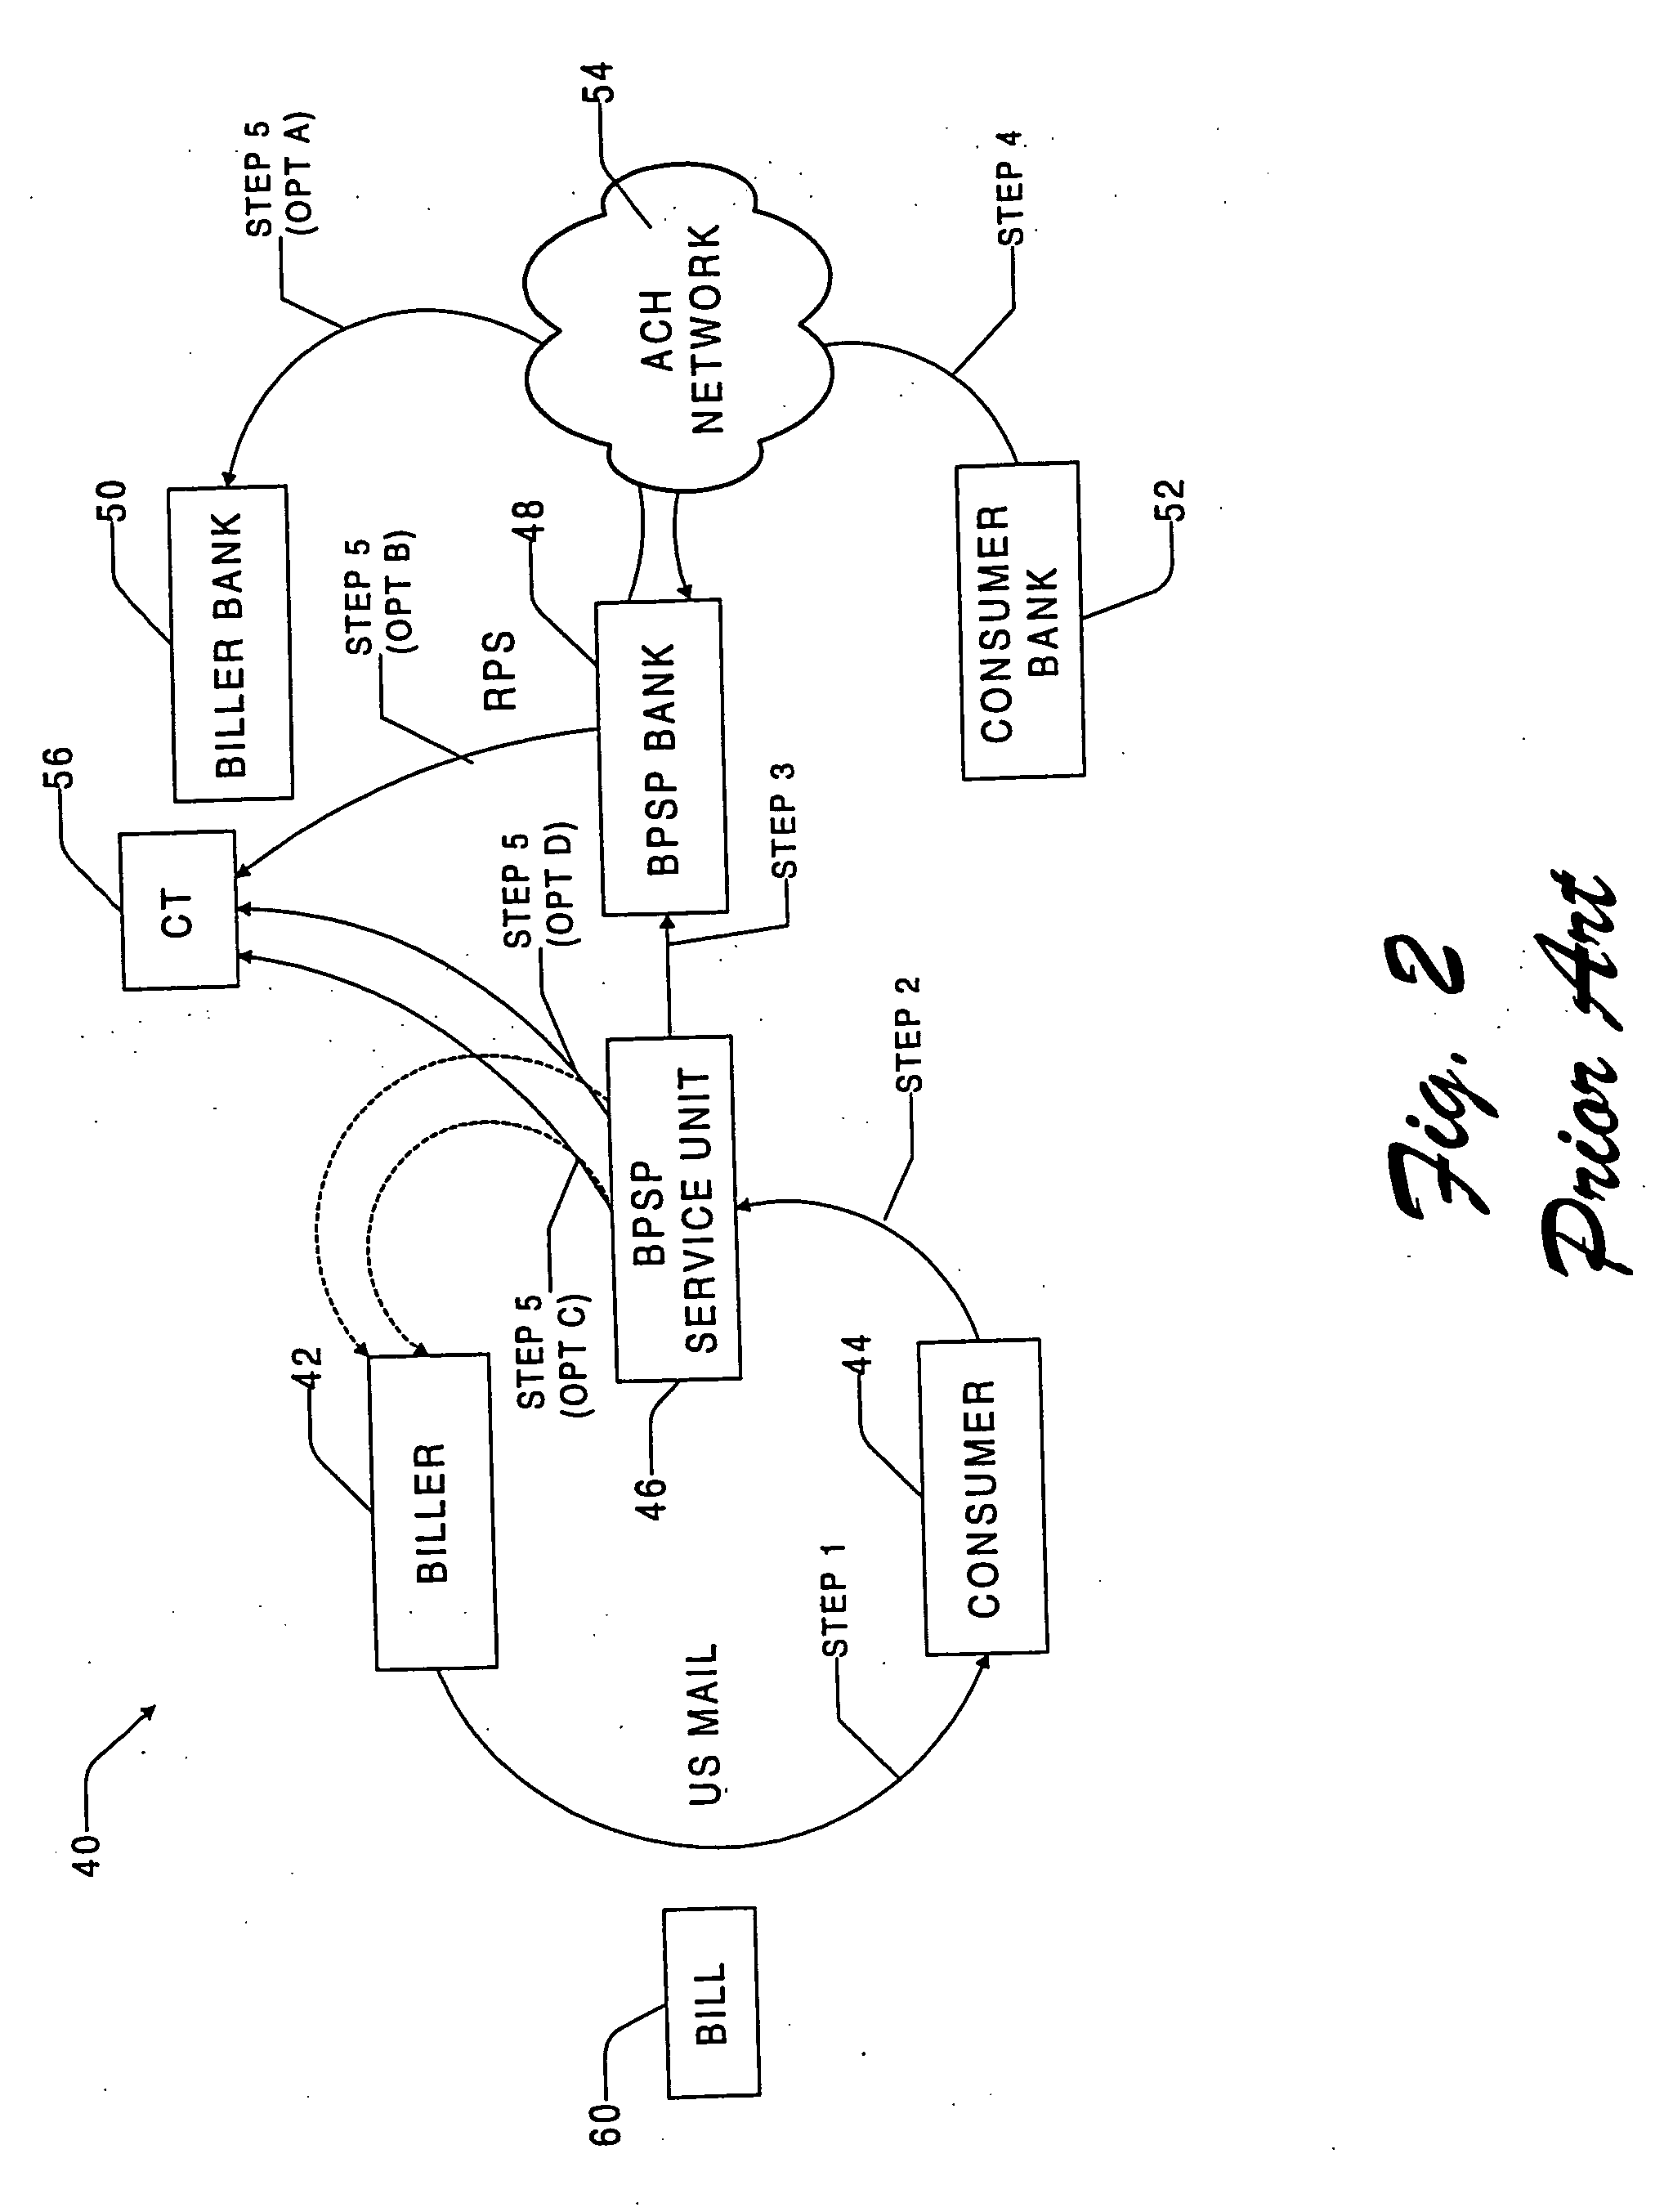 Electronic bill presentment and payment system